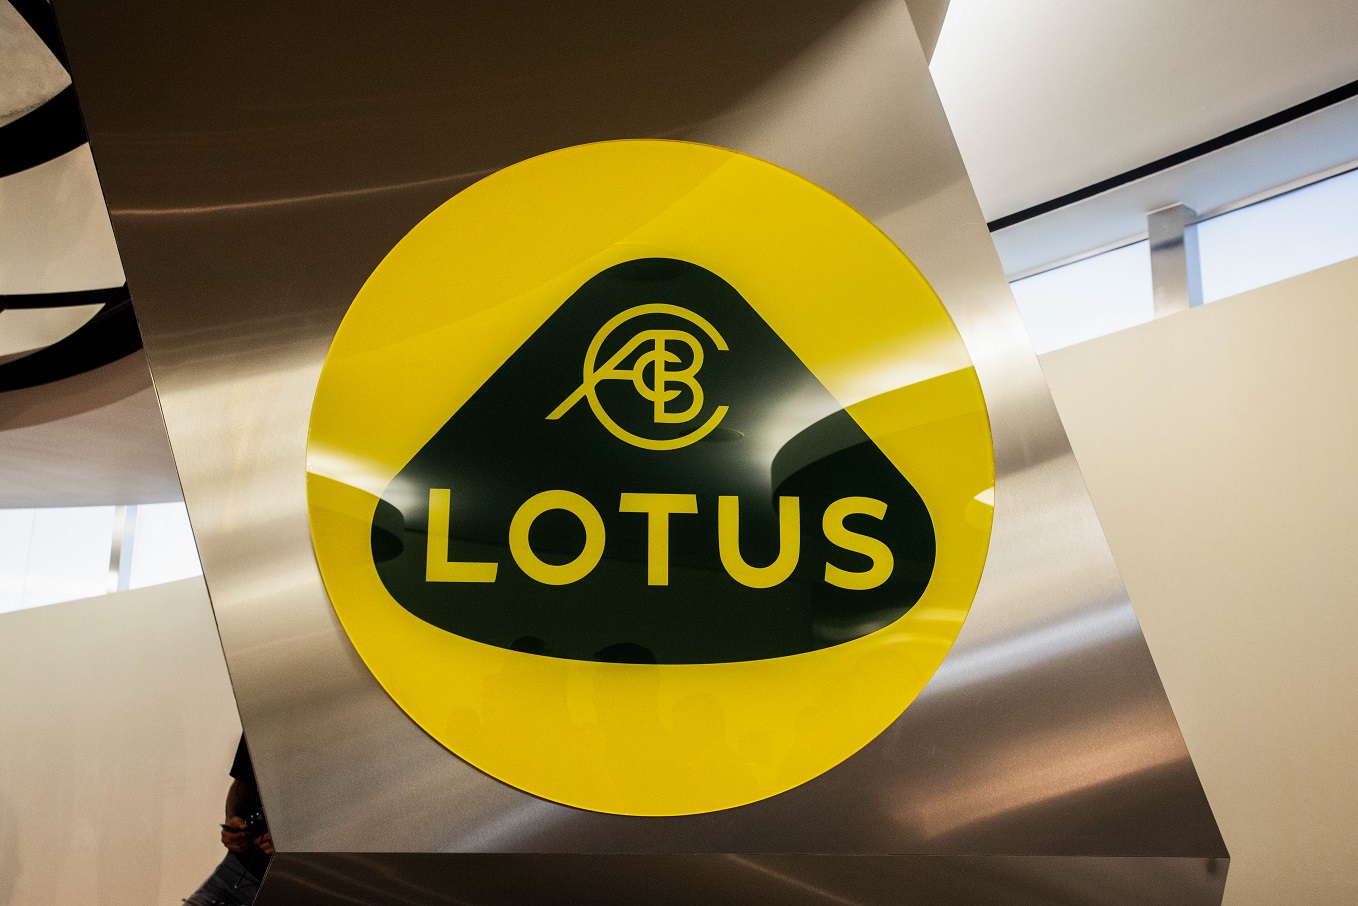 You are currently viewing Event Signs for Lotus Cars’ Event in San Fernando Valley